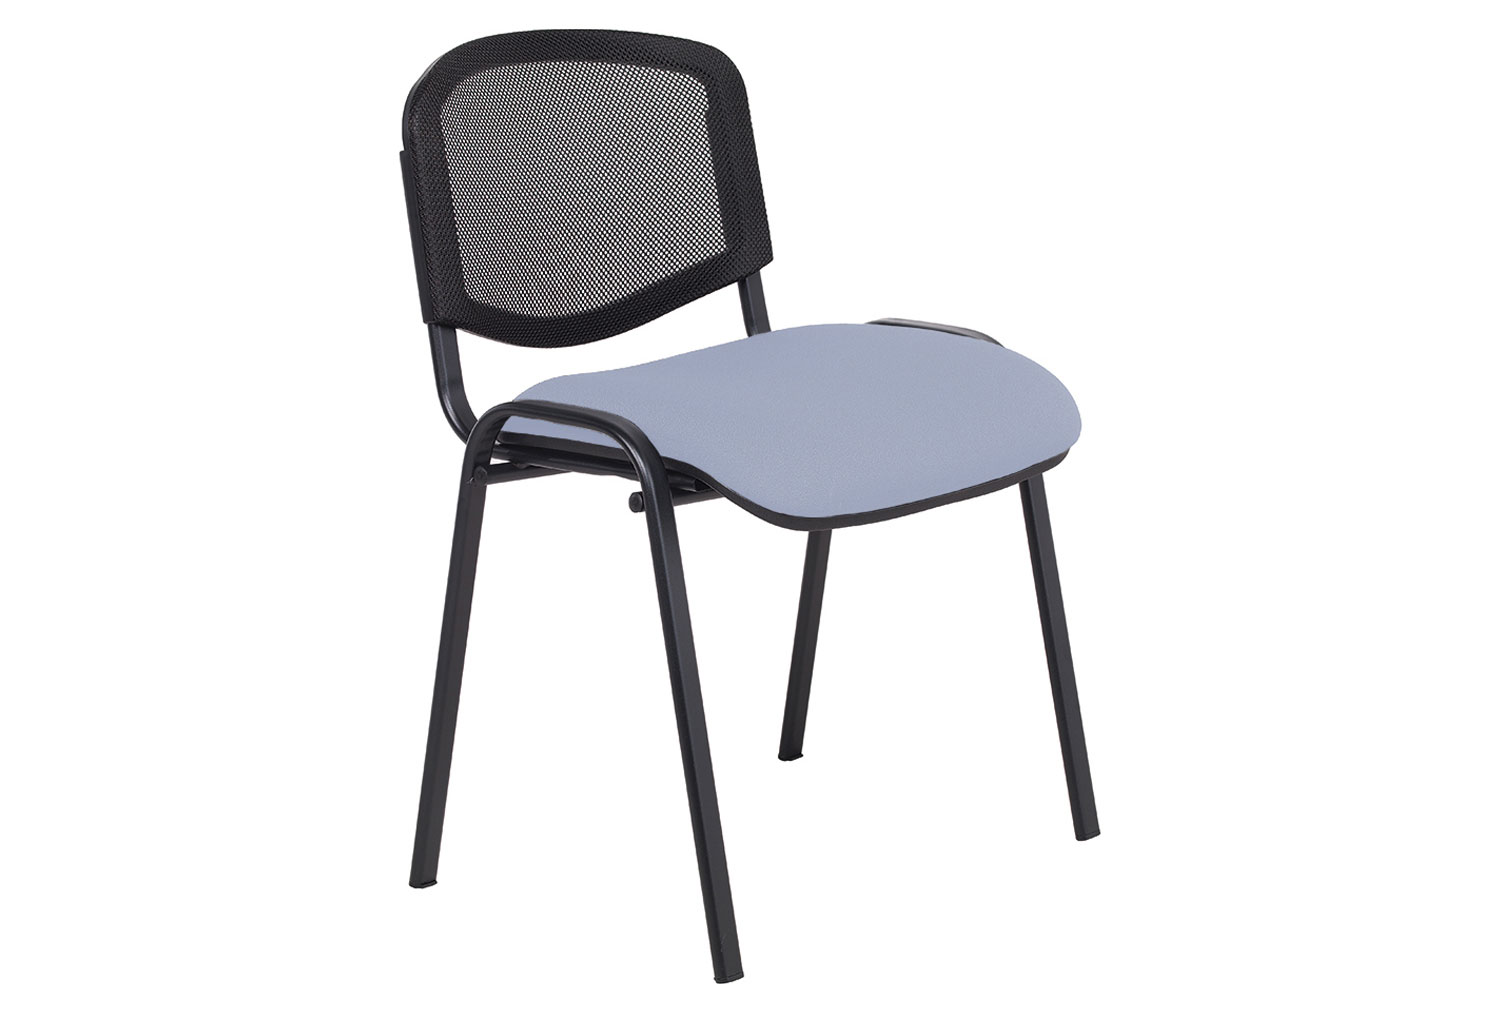 Pack of 4 Sevron Mesh Back Stacking Conference Chairs